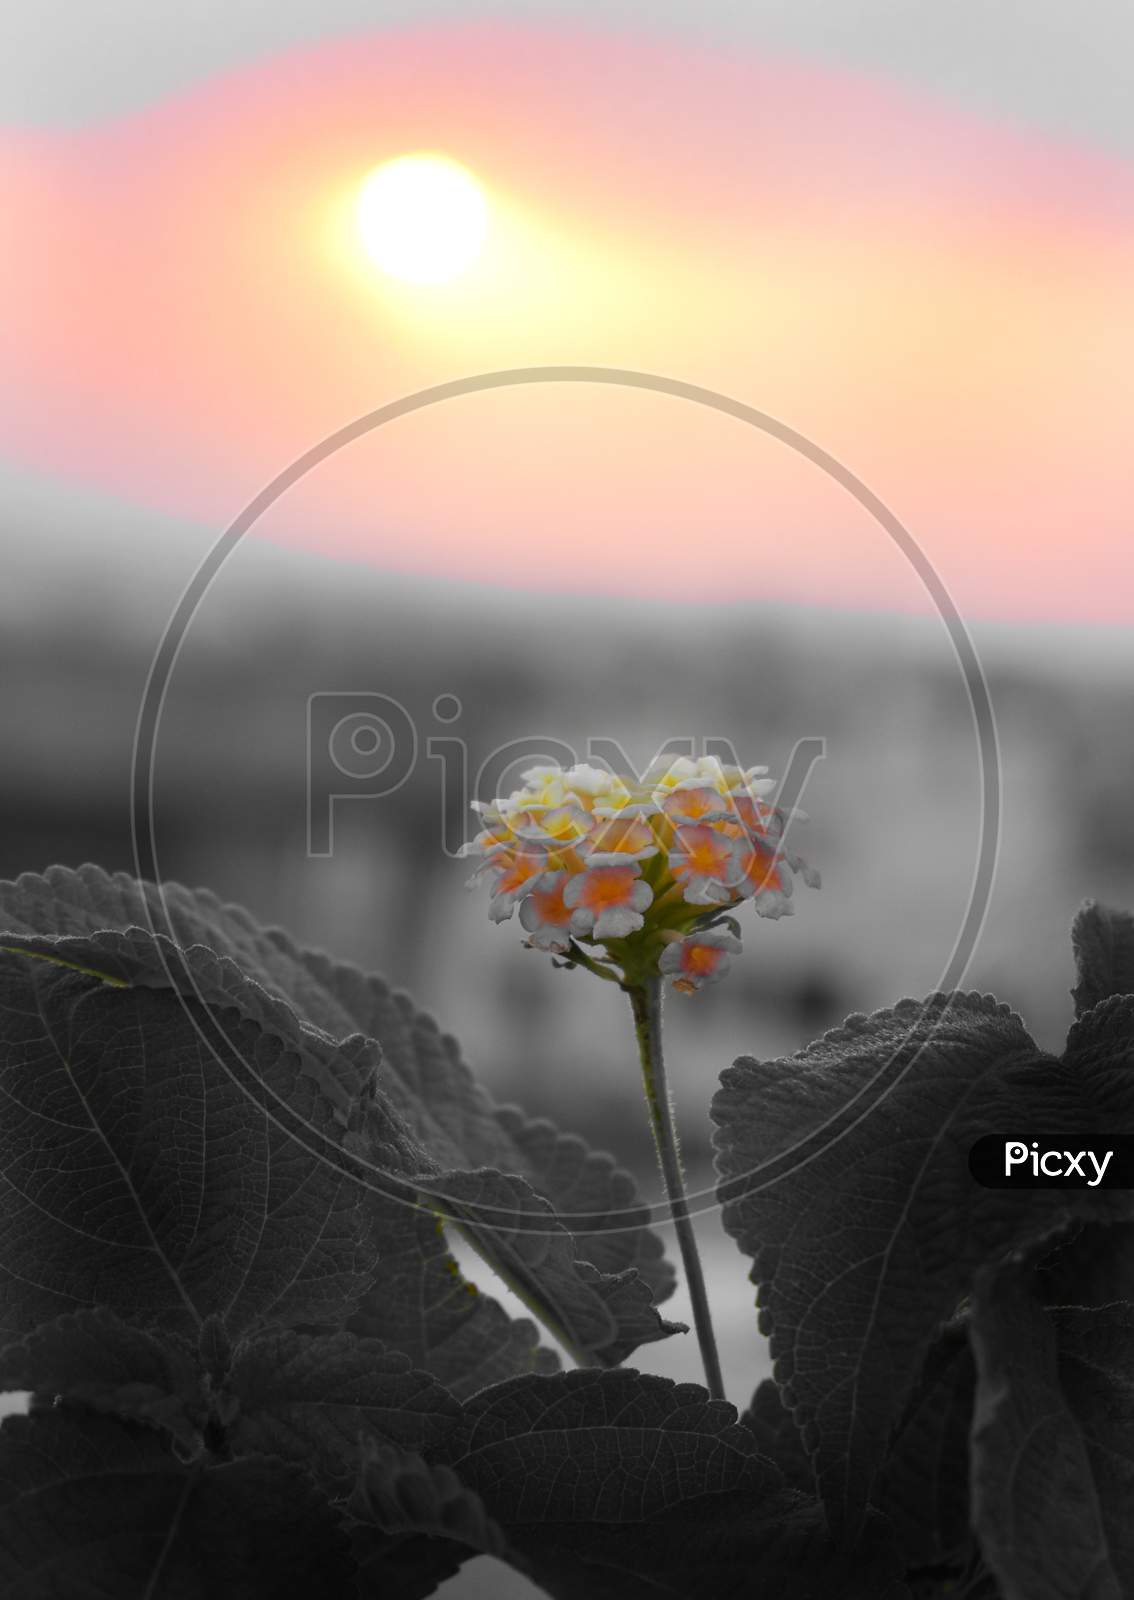 Beutiful multicolor lantana flower with blackish leaves, background and colorful sky